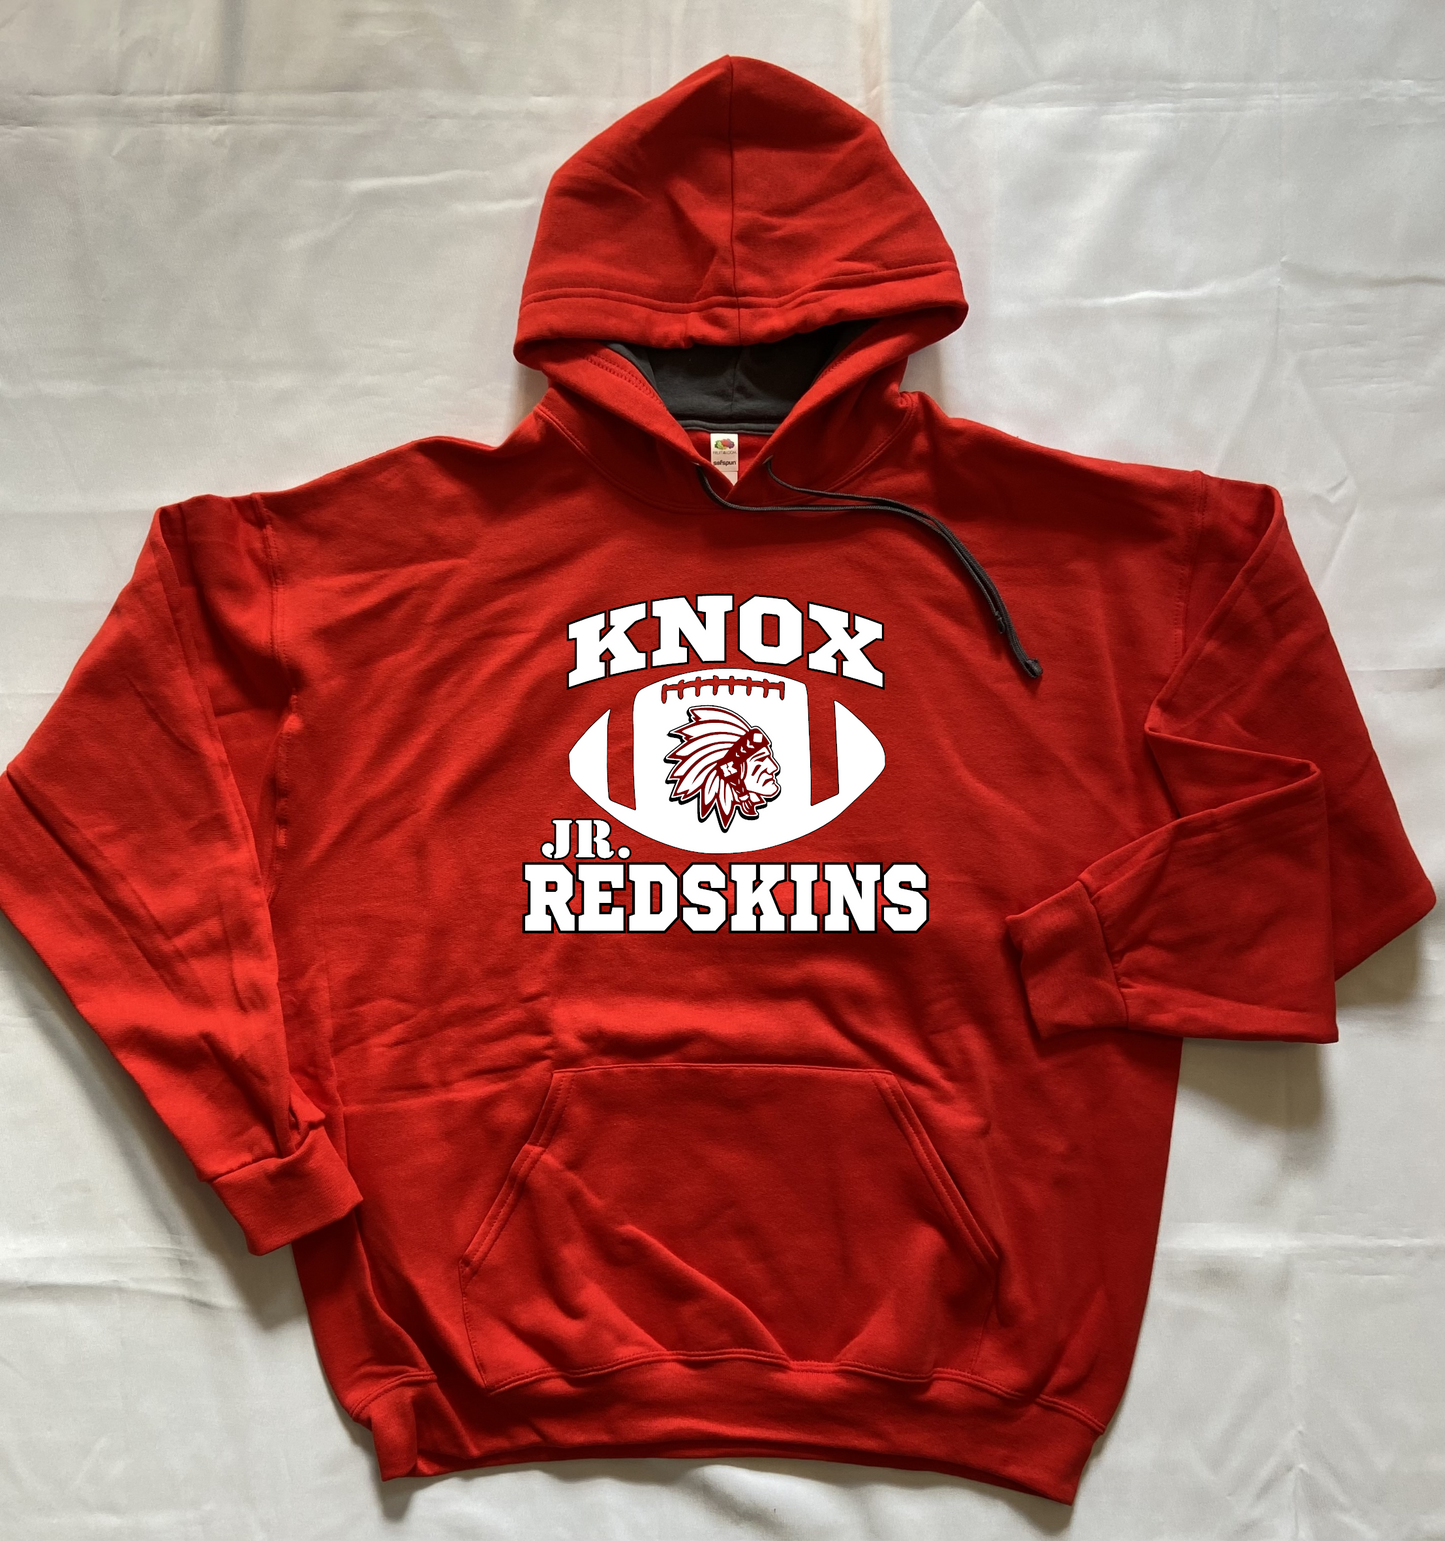 Knox Jr Redskins Football Hoodie - Red - Adult and Youth Sizes